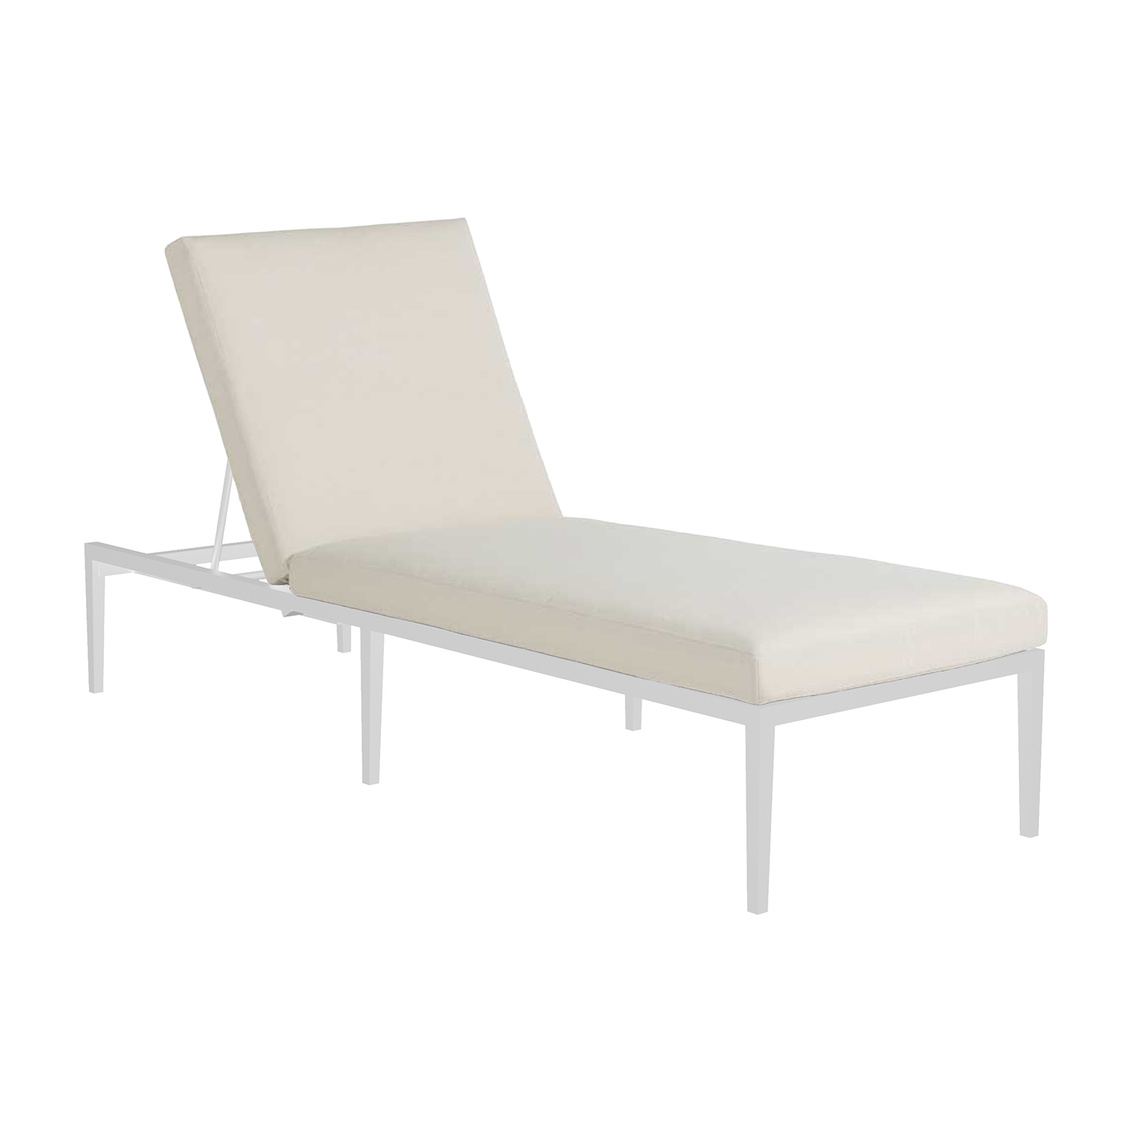 elegante aluminum chaise lounge in chalk – frame only product image